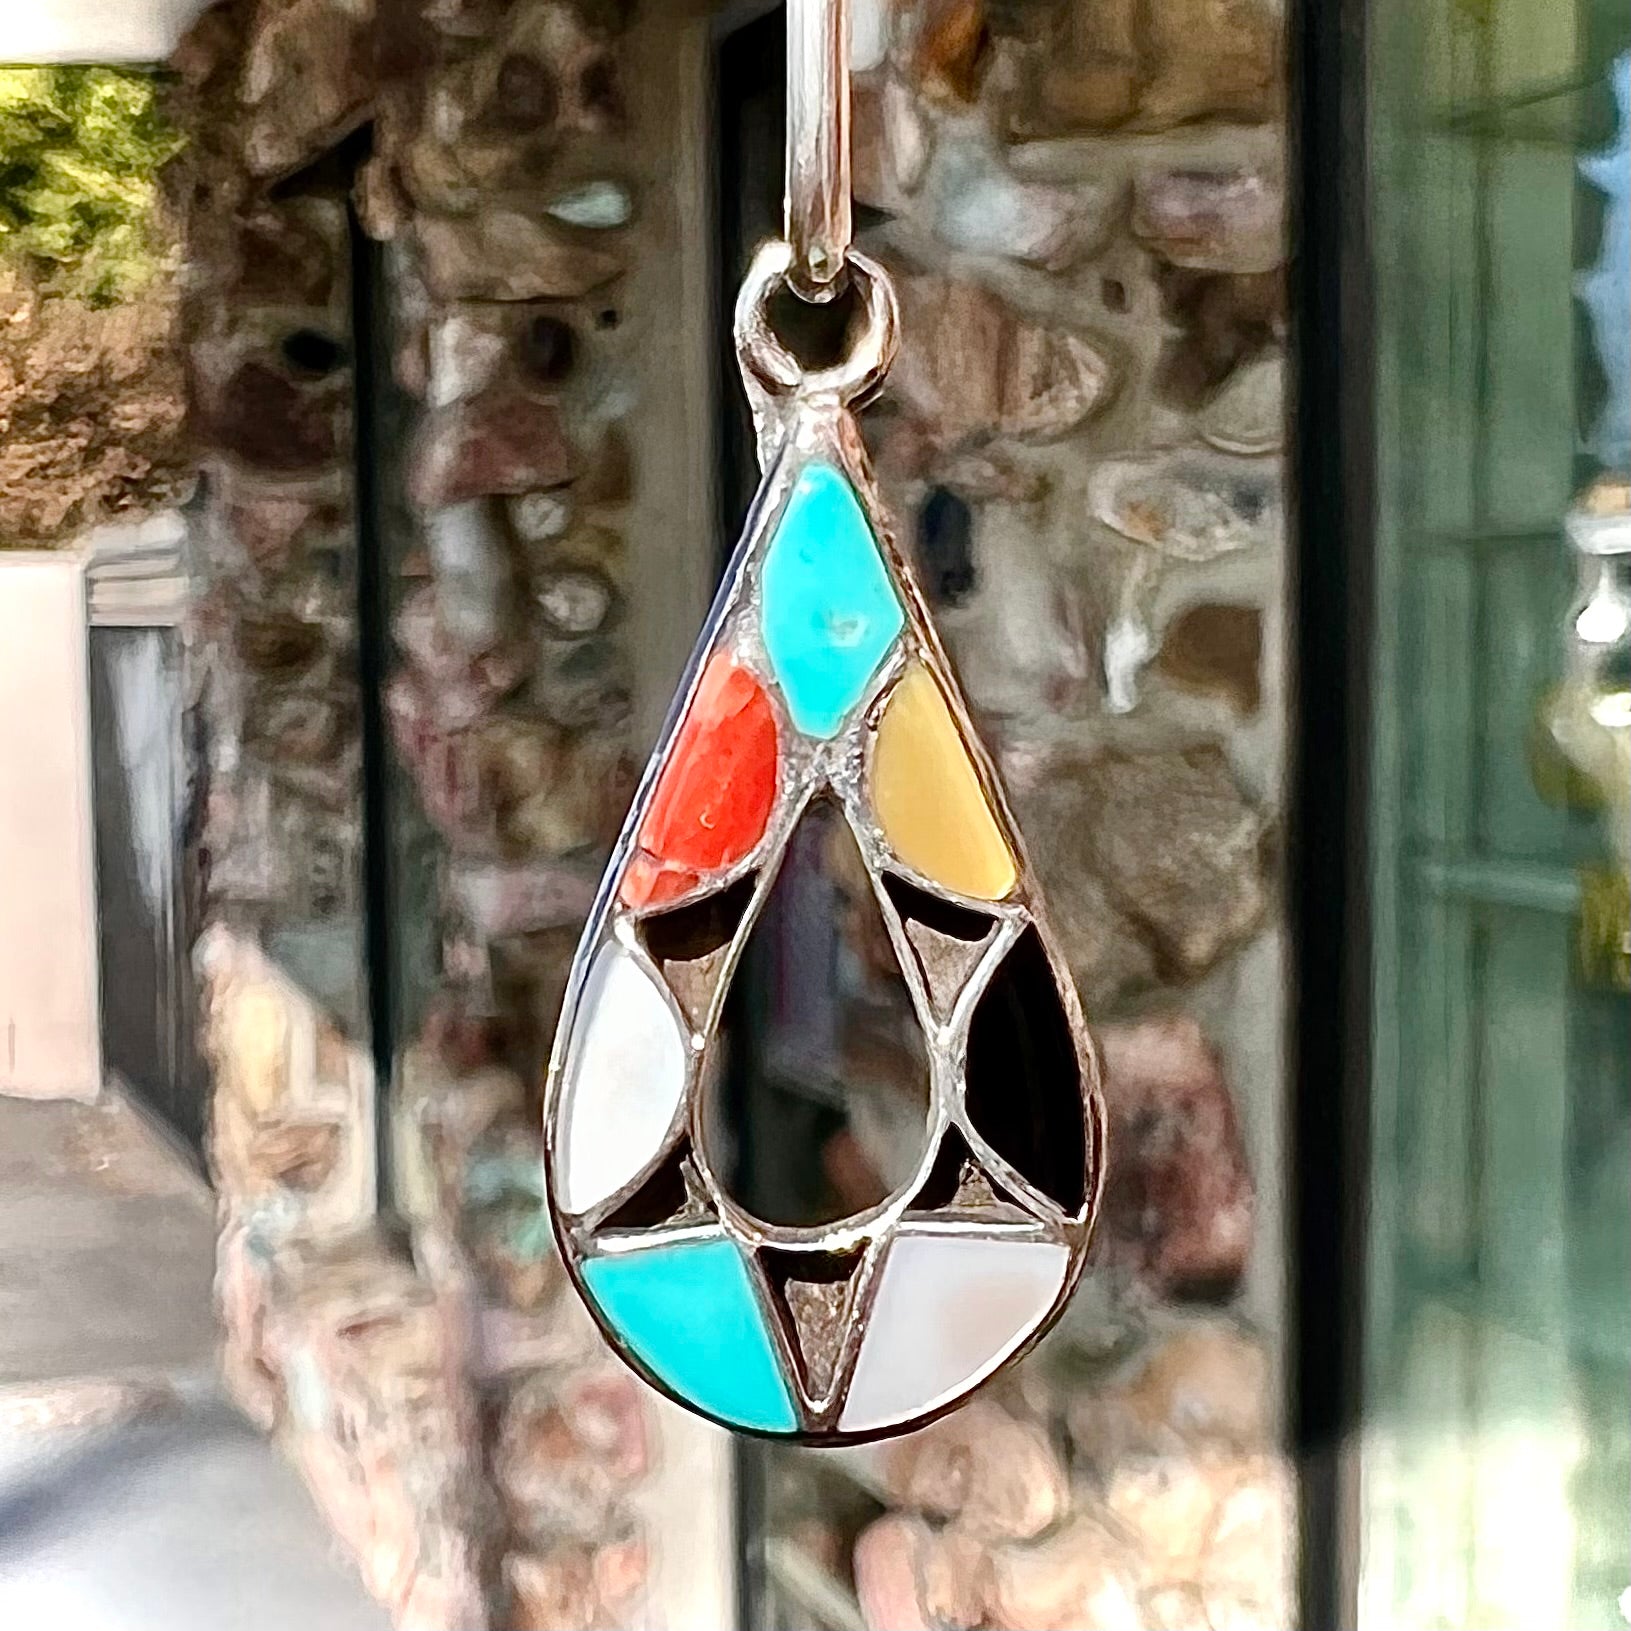 Photo of Zuni Indian pendant with stone inlay of coral, onyx, turquoise, jasper, and mother of pearl.